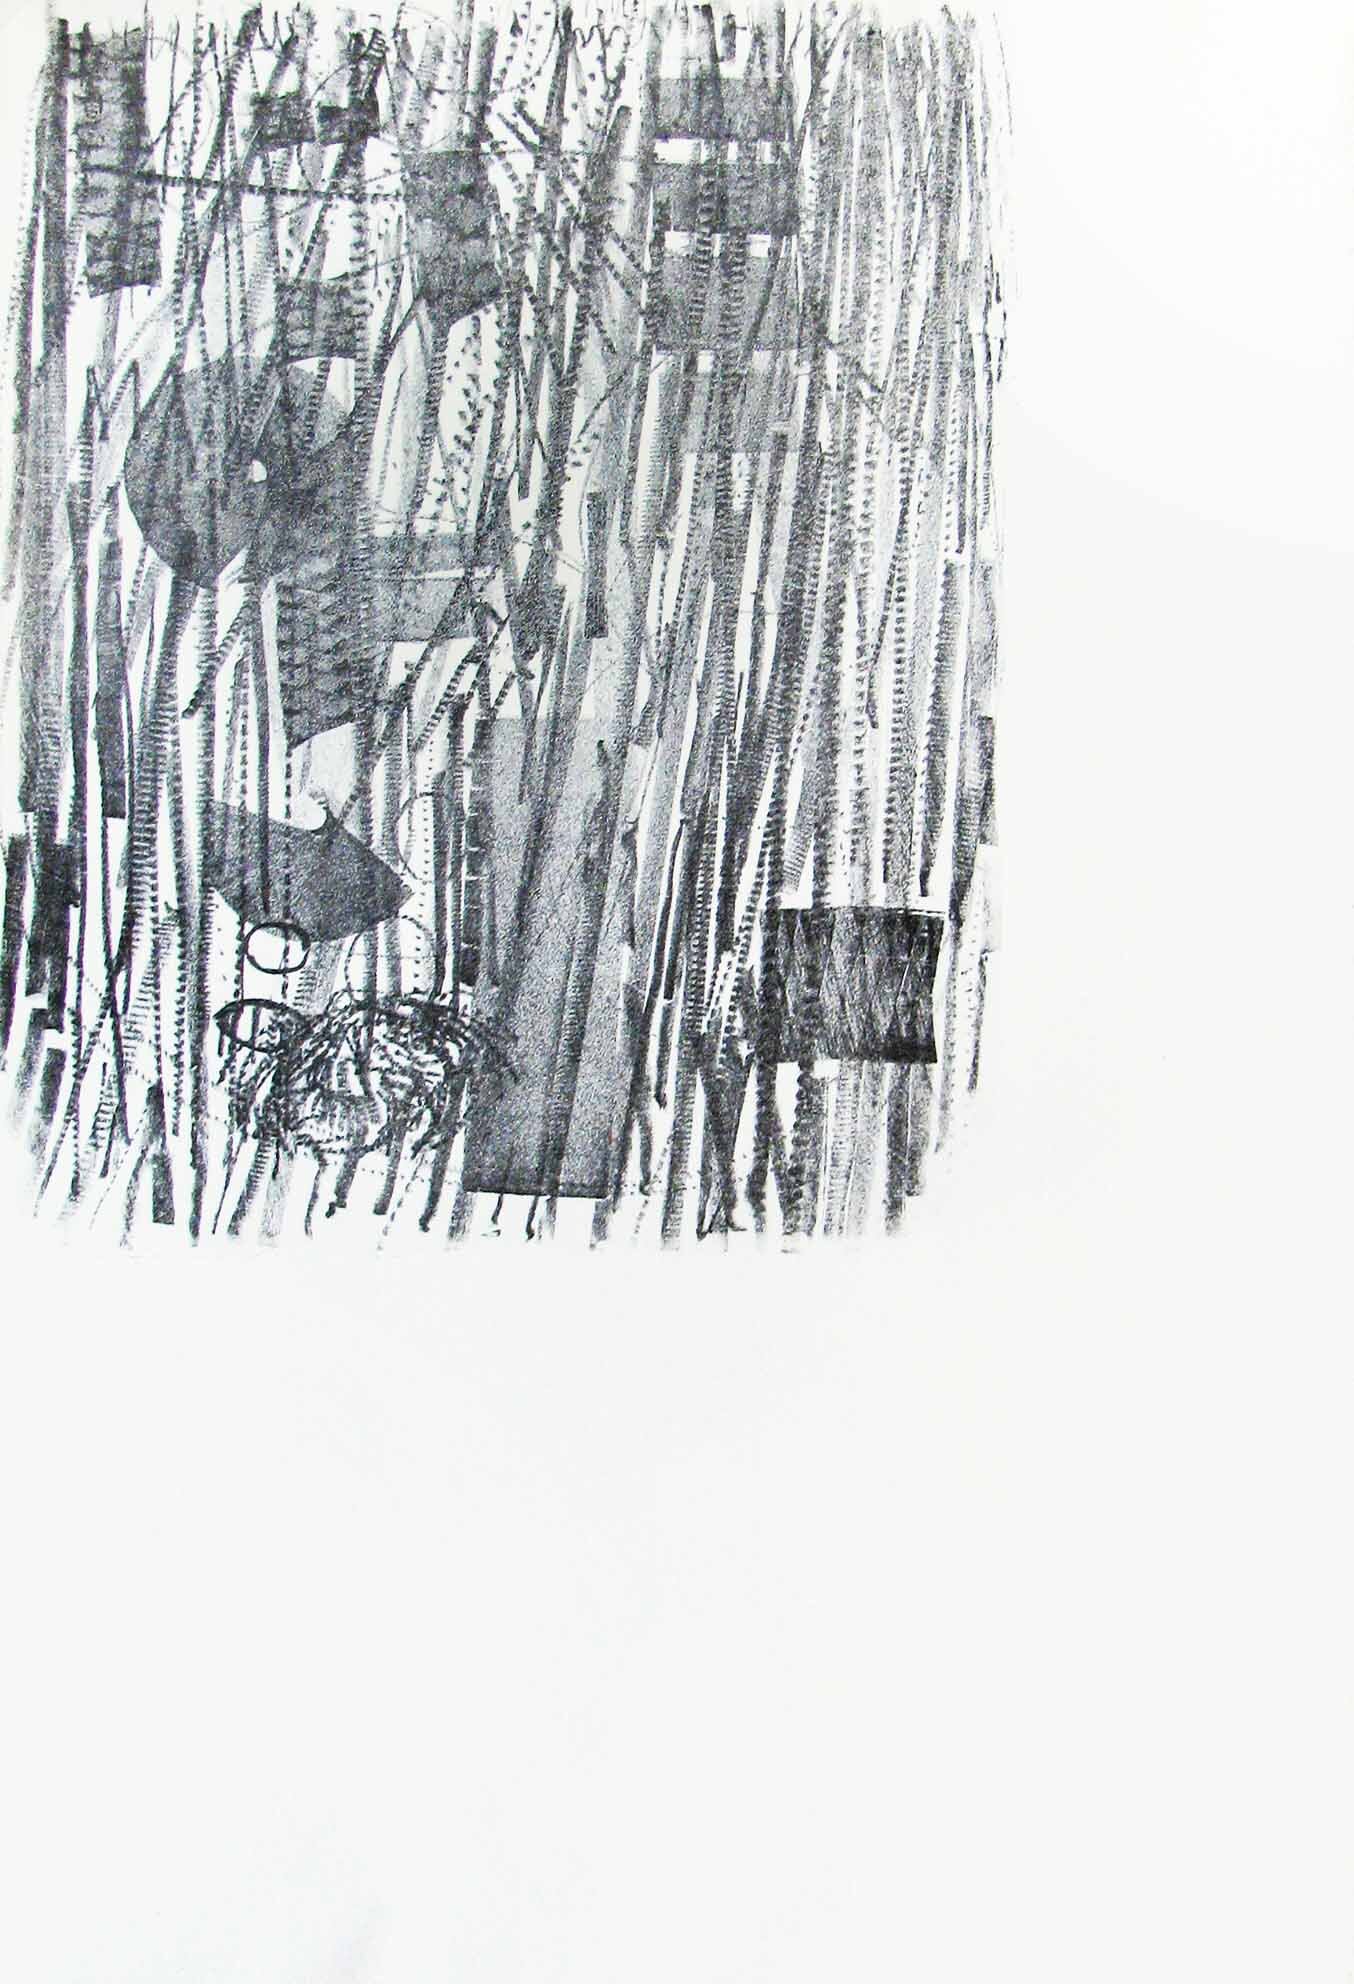  “Post-Meteo (1)”, 53,5 × 36,5 cm, Lithography, 2012 